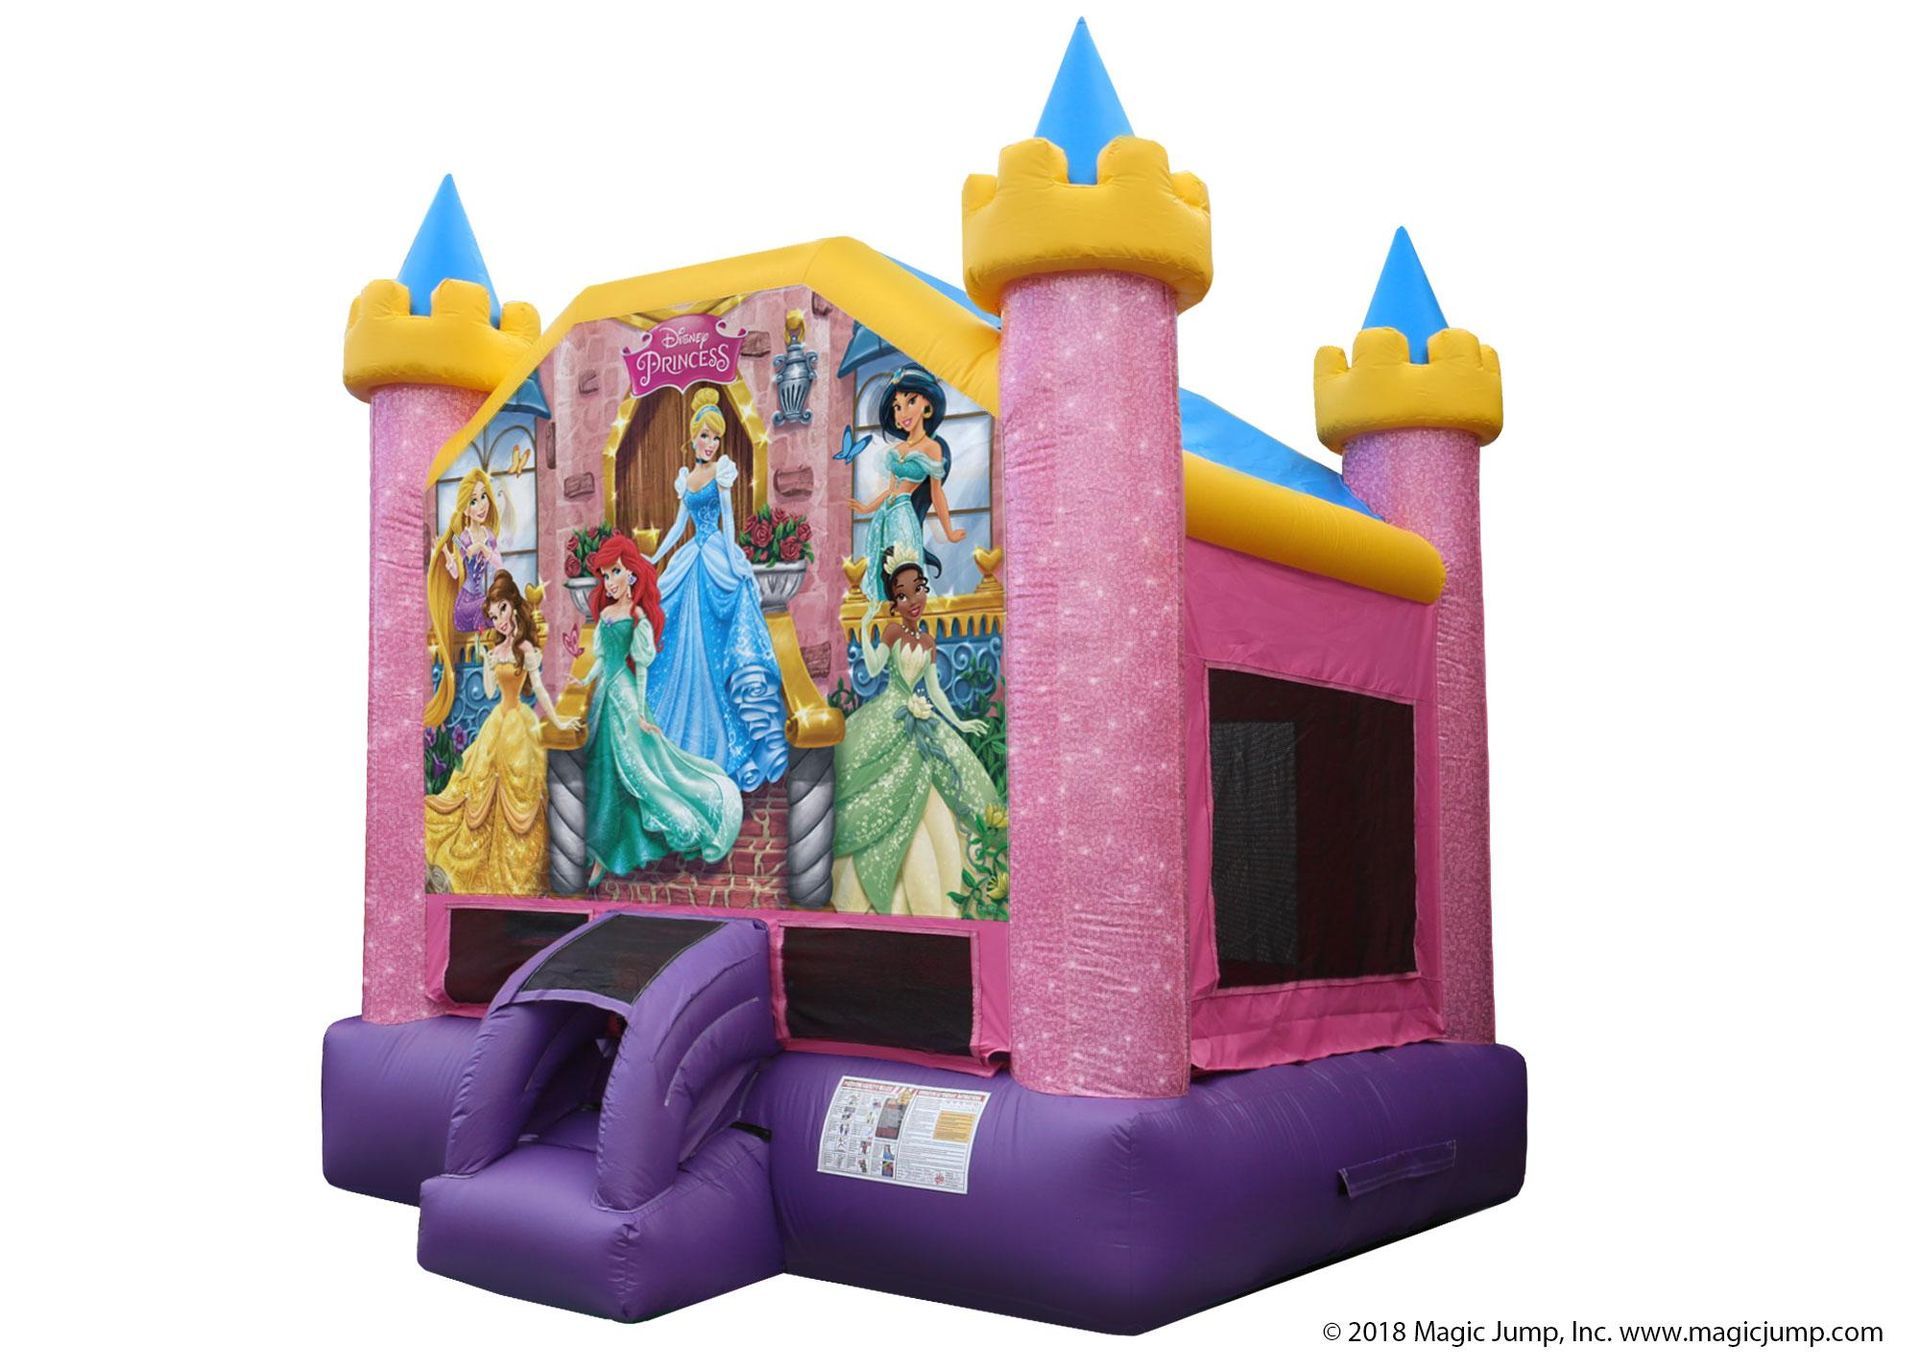 Pink and Purple Bouncy House with Disney Princesses | Rancho Cucamonga, CA | Jam Jam bounce house and inflatable party rental